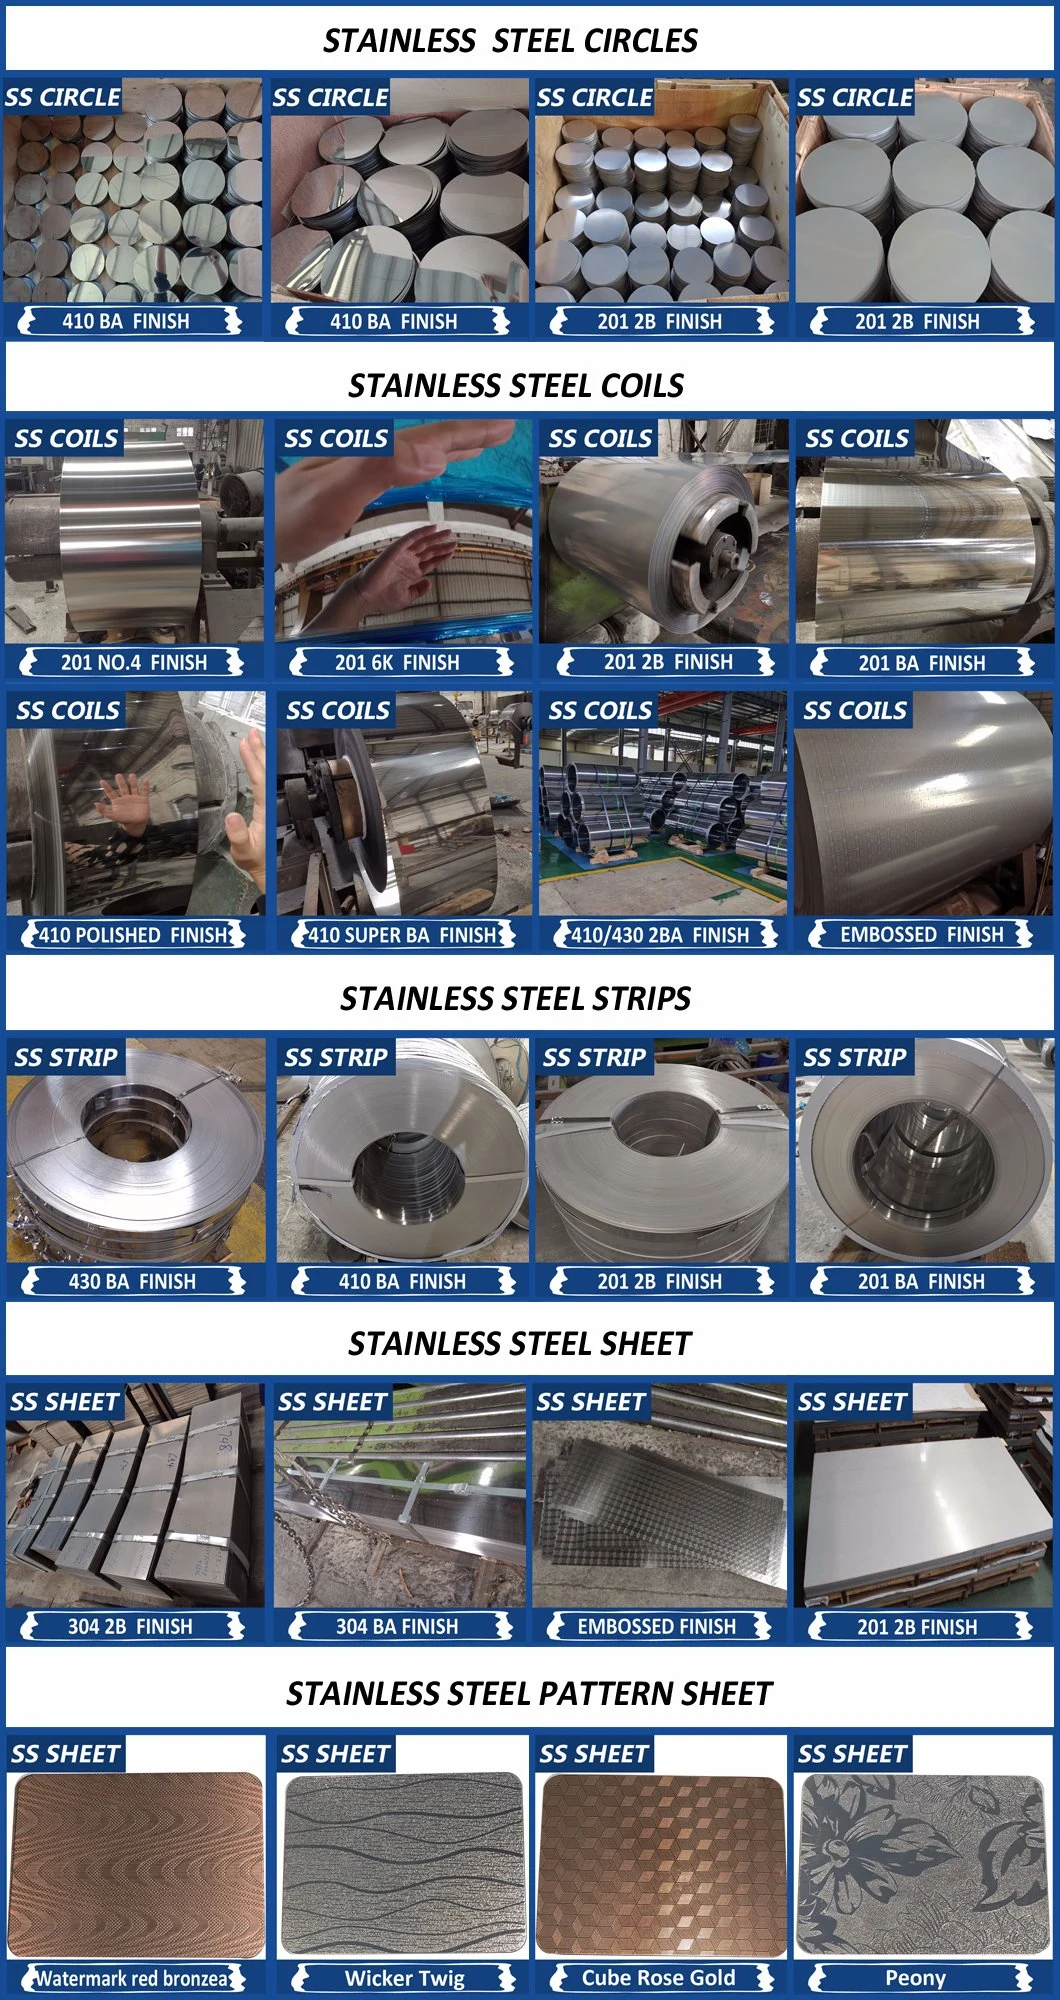 Cold Rolled 304 Stainless Steel Coil/Strip for Tableware Hinge